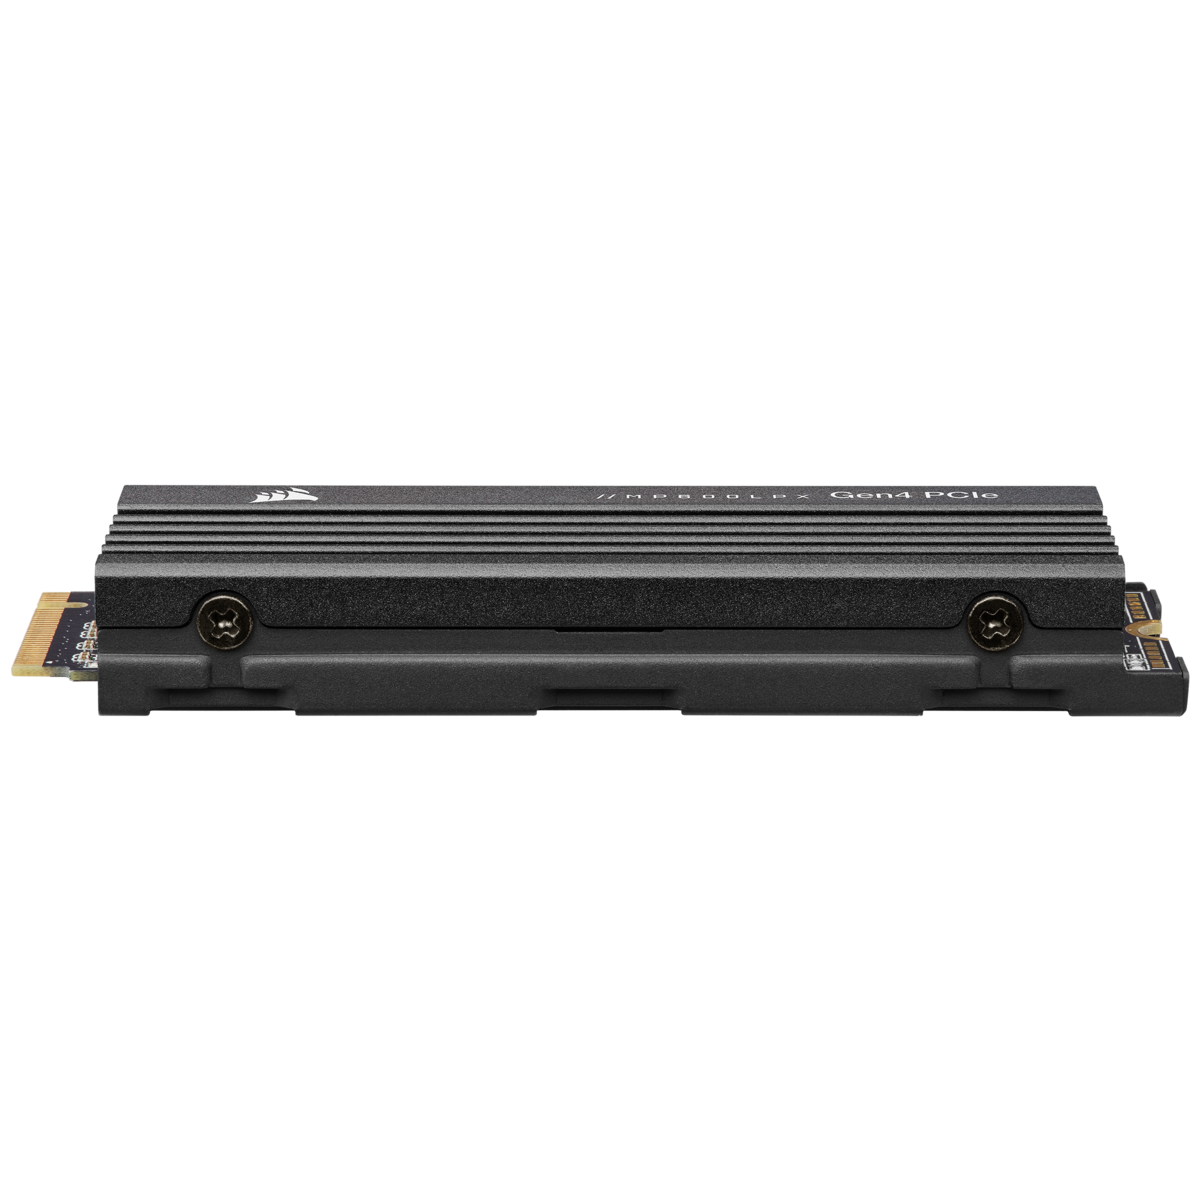 Corsair MP600 PRO LPX 1TB M.2 NVMe PCIe x4 Gen4 SSD - Optimized for PS5 (Up  to 7,100MB/sec Sequential Read & 5,800MB/sec Write Speeds, High-Speed  Interface, Compact Form Factor) Black